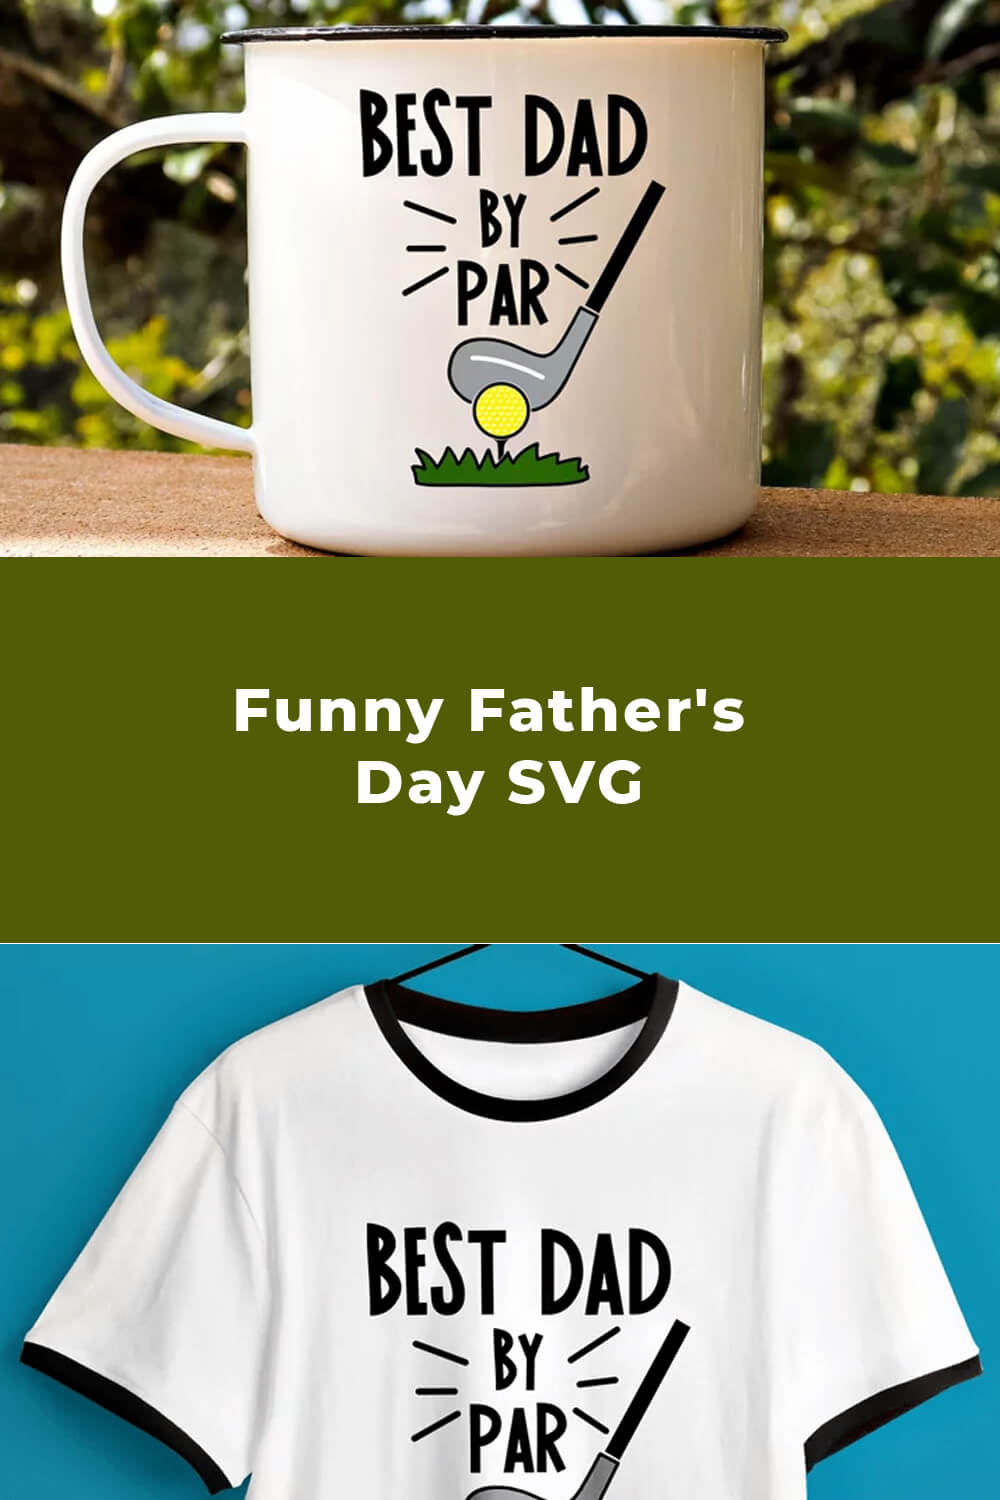 Two examples of funny father's day SVG.